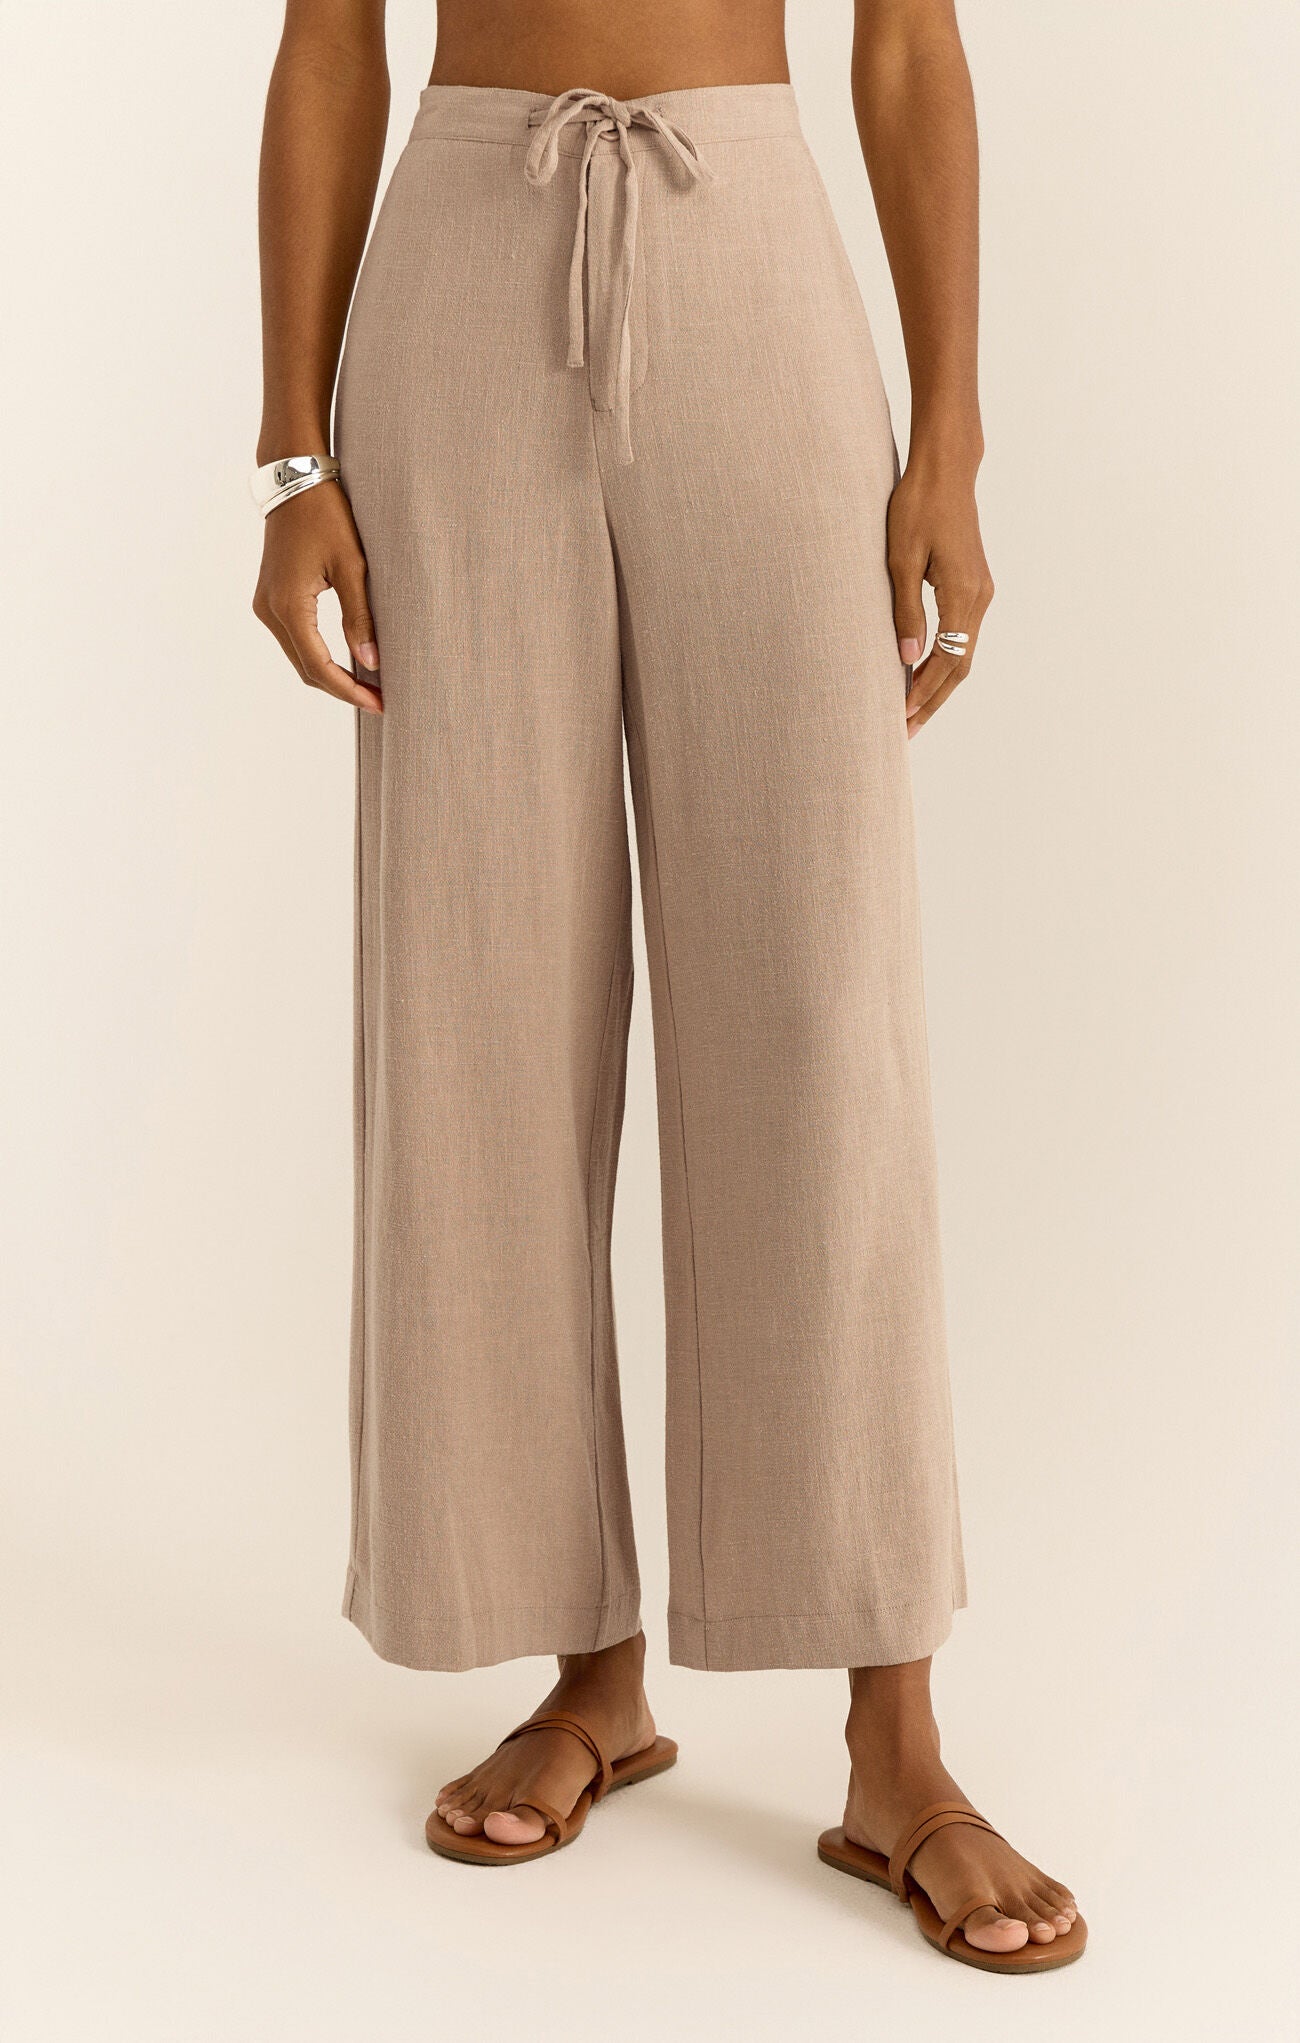 ZSupply Cortez Cropped Pant -sand